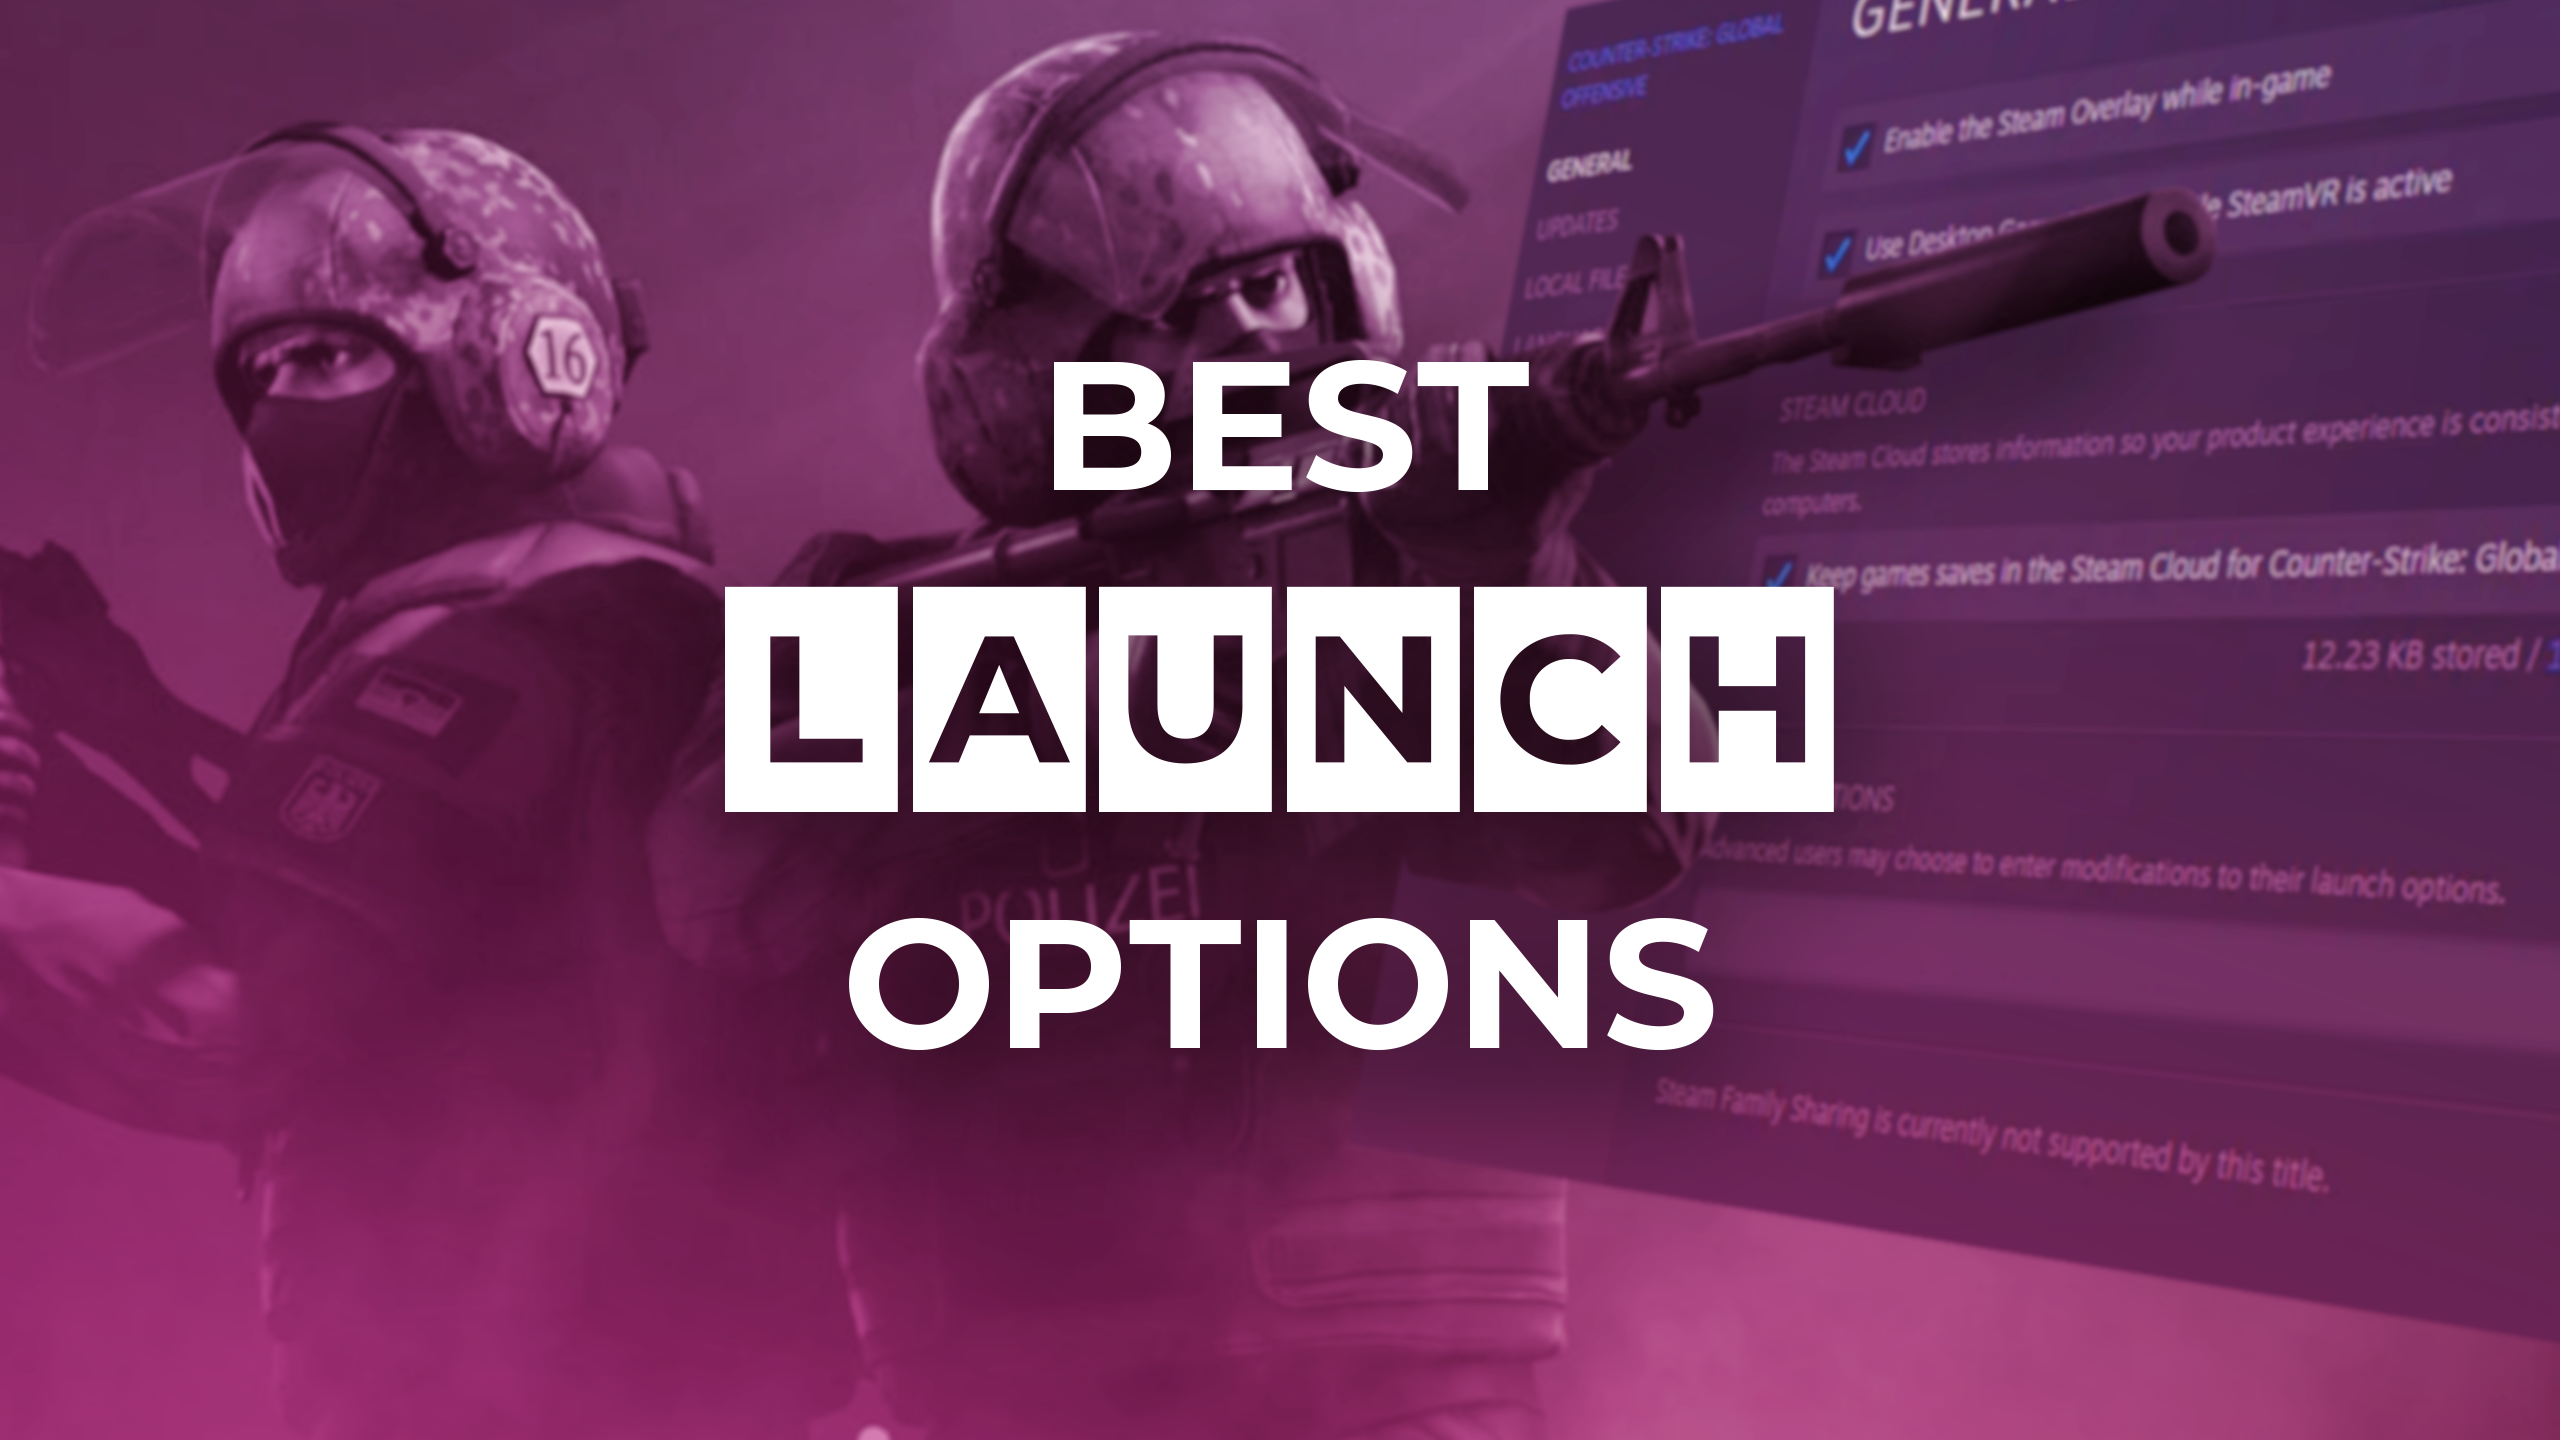 In steam launch options фото 41